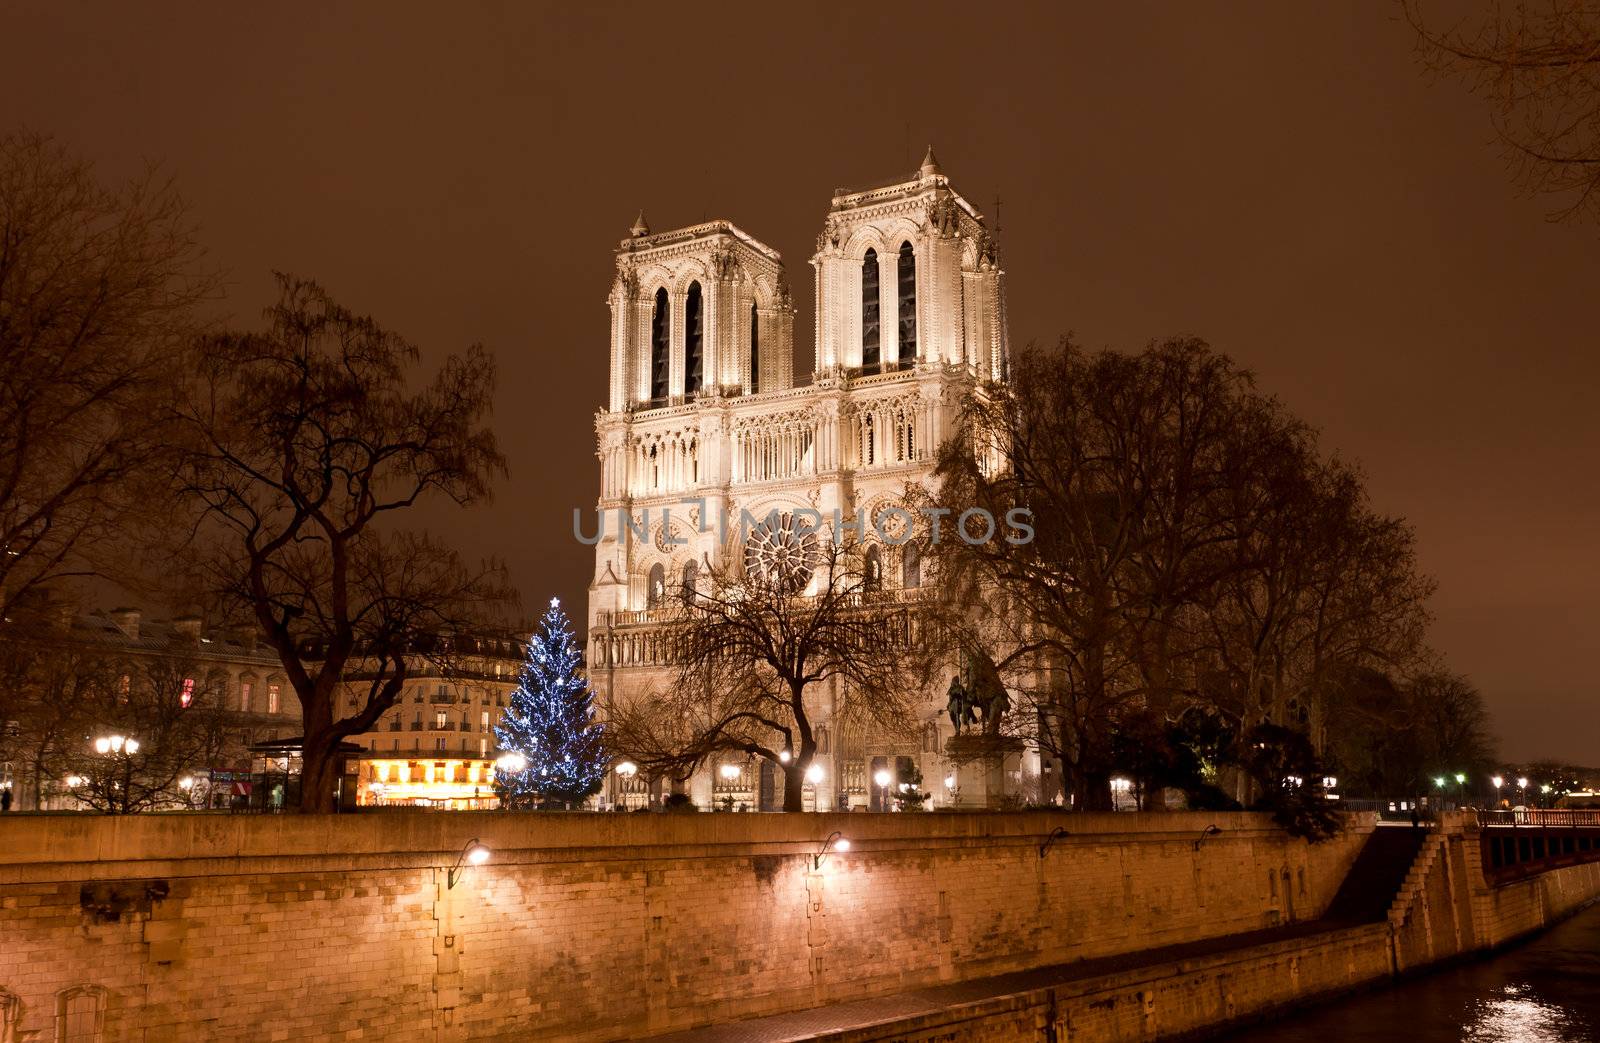 The famous Notre Dame at night in Paris, France